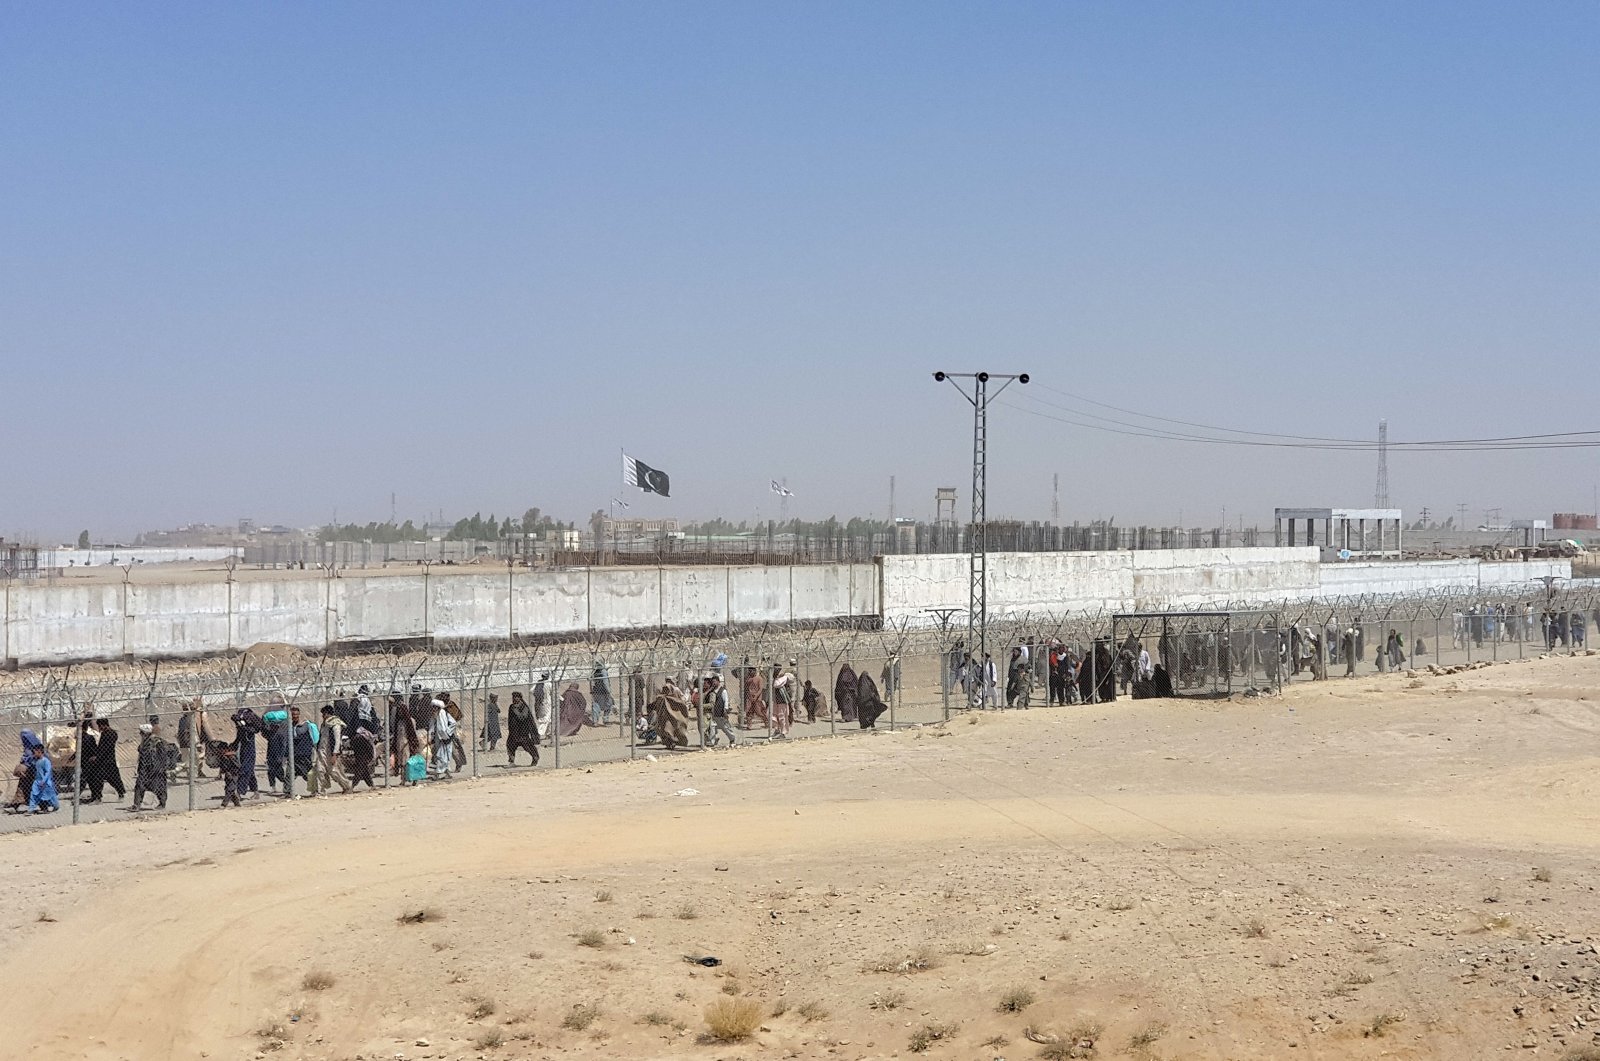 People arriving from Afghanistan cross the fence at the Friendship Gate crossing point, in the Pakistan-Afghanistan border town of Chaman, Pakistan, Aug. 18, 2021. (REUTERS)